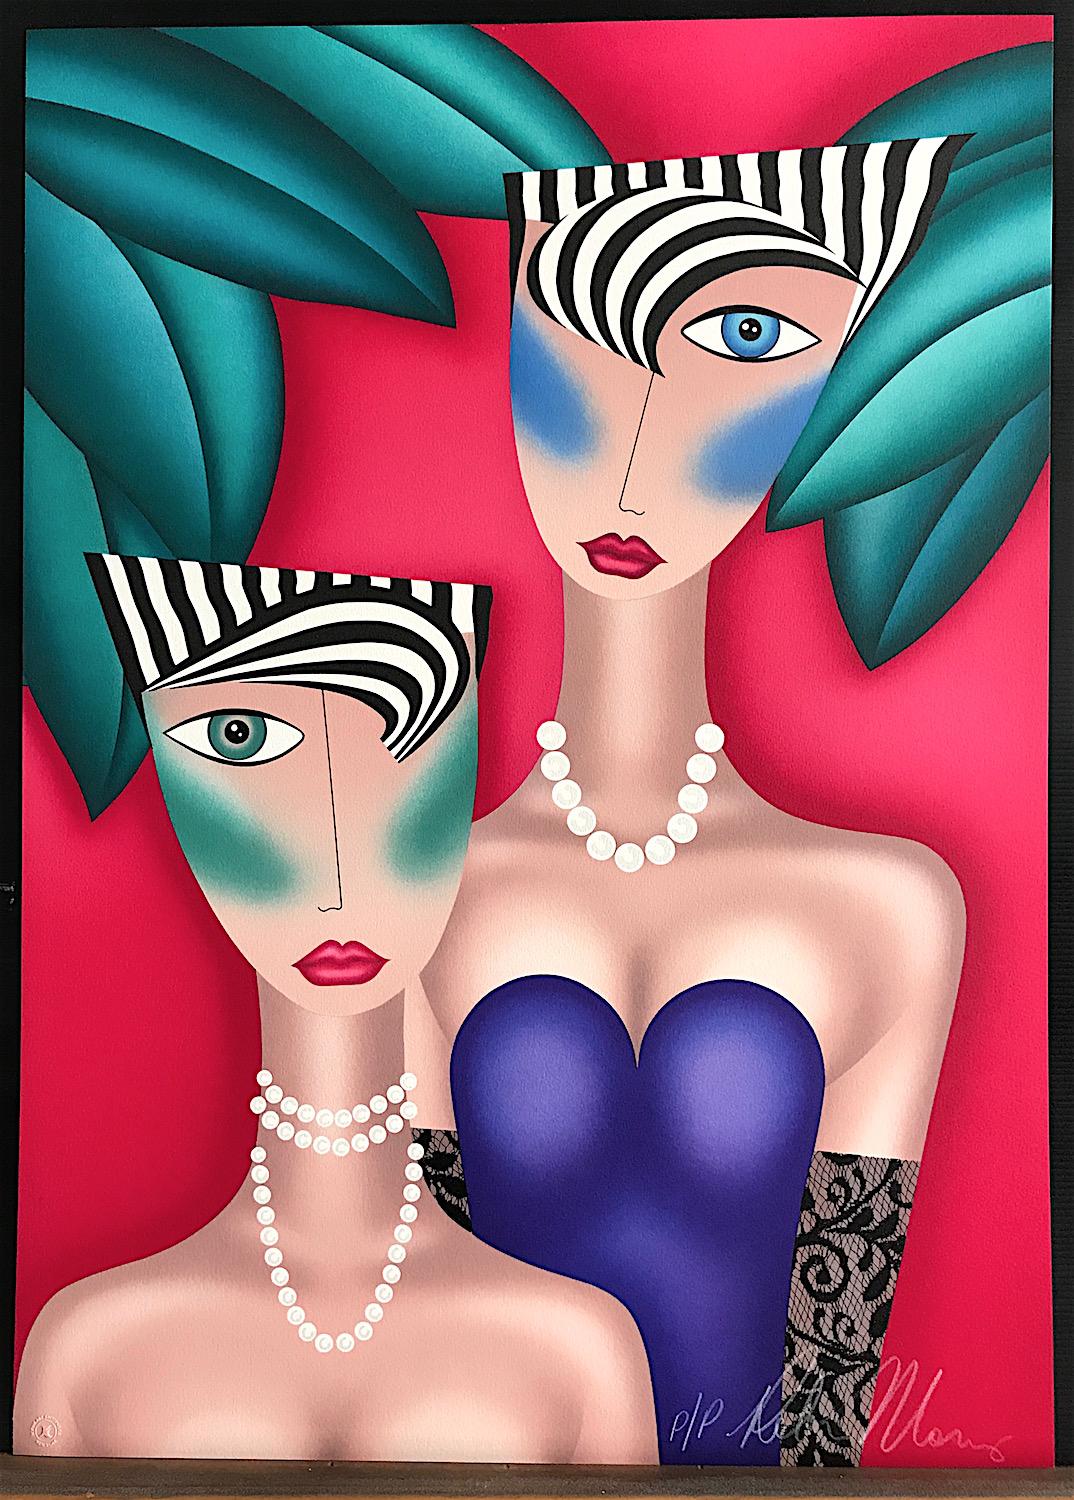 AT THE CAT CLUB Signed Lithograph Pop Art Portrait, White Pearls, Theater Makeup - Print by Robin Morris